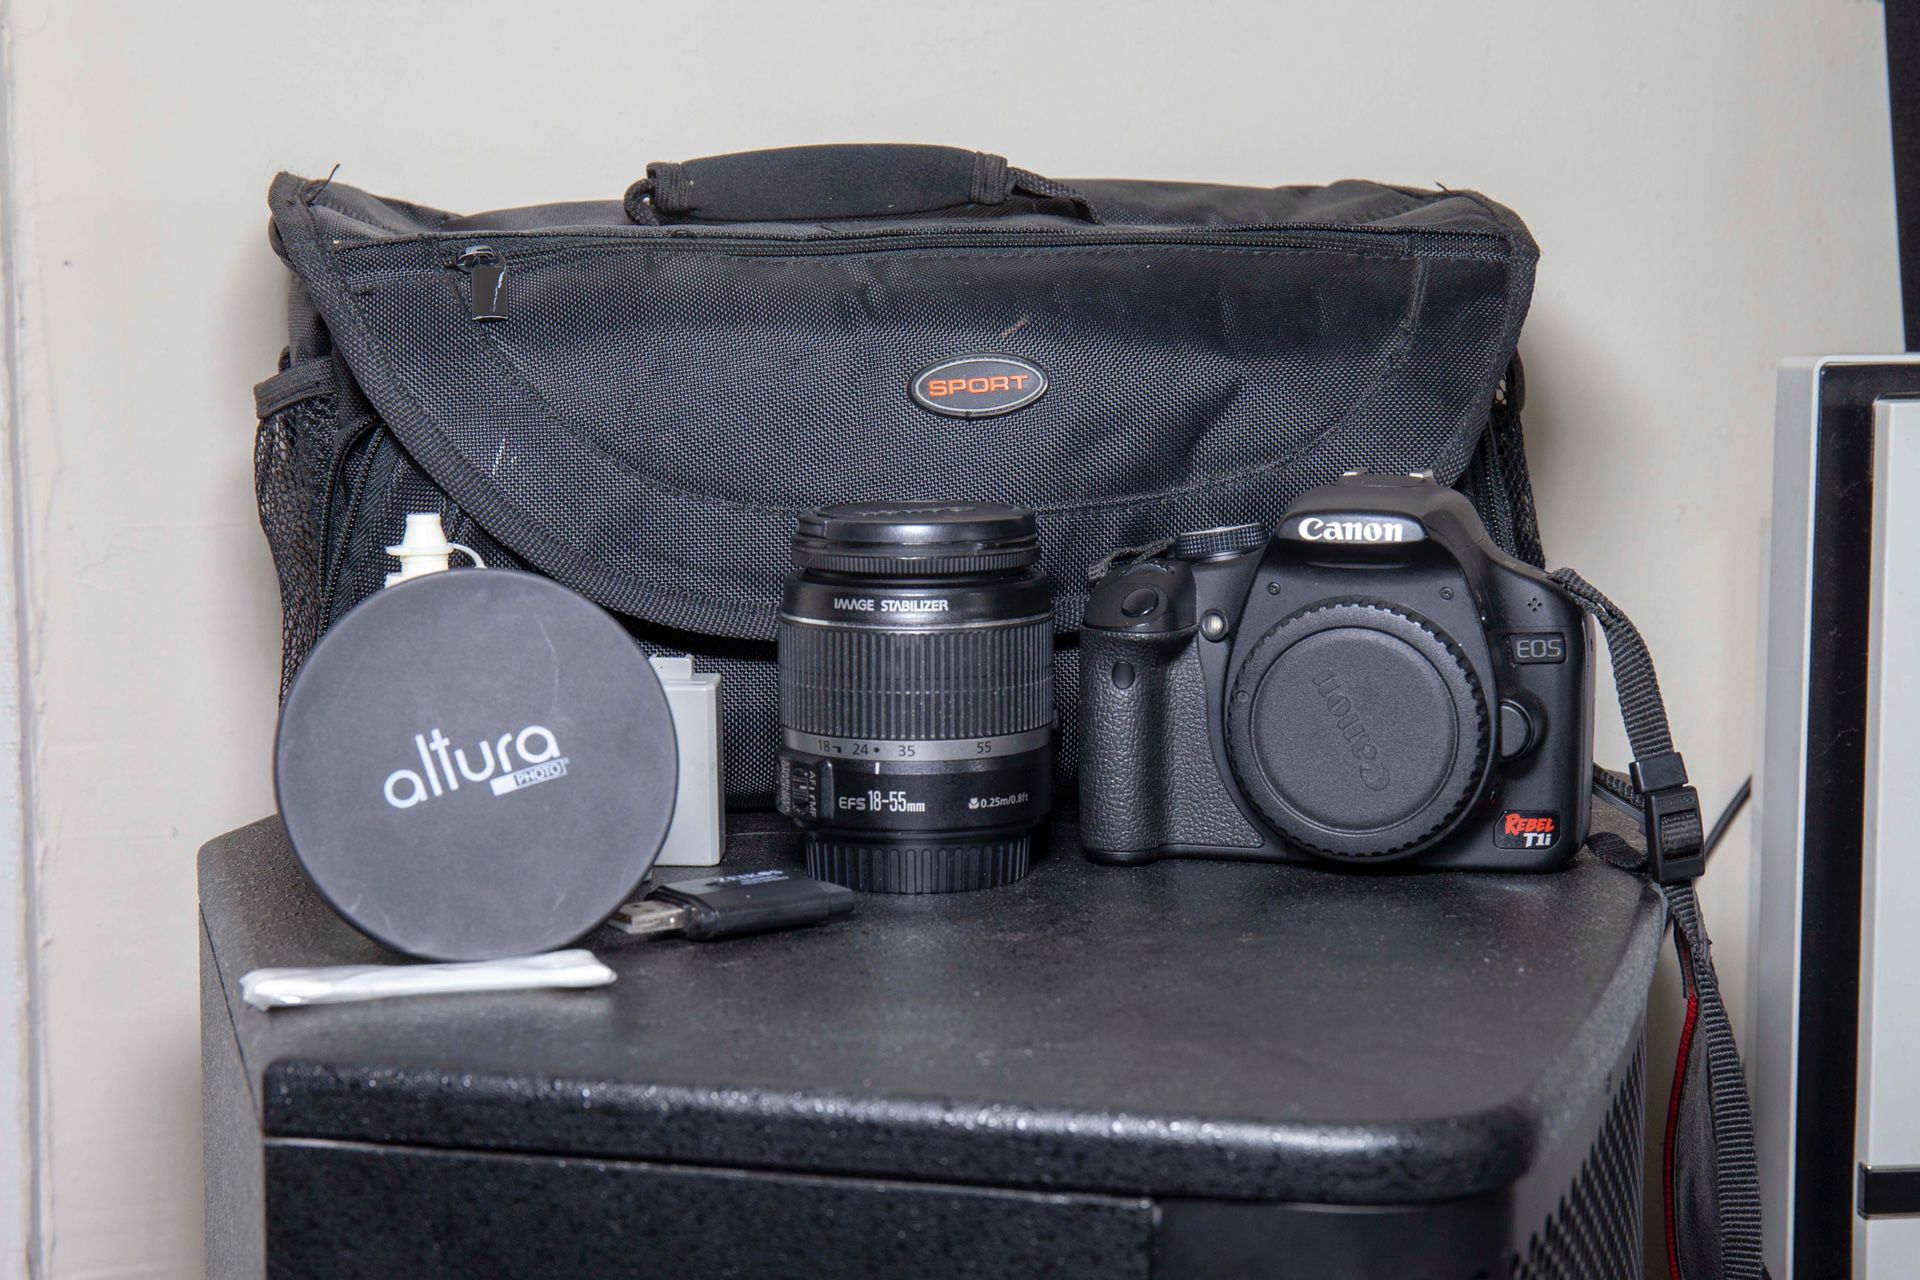 Canon EOS 500D (Rebel T1i) with accessories and lens